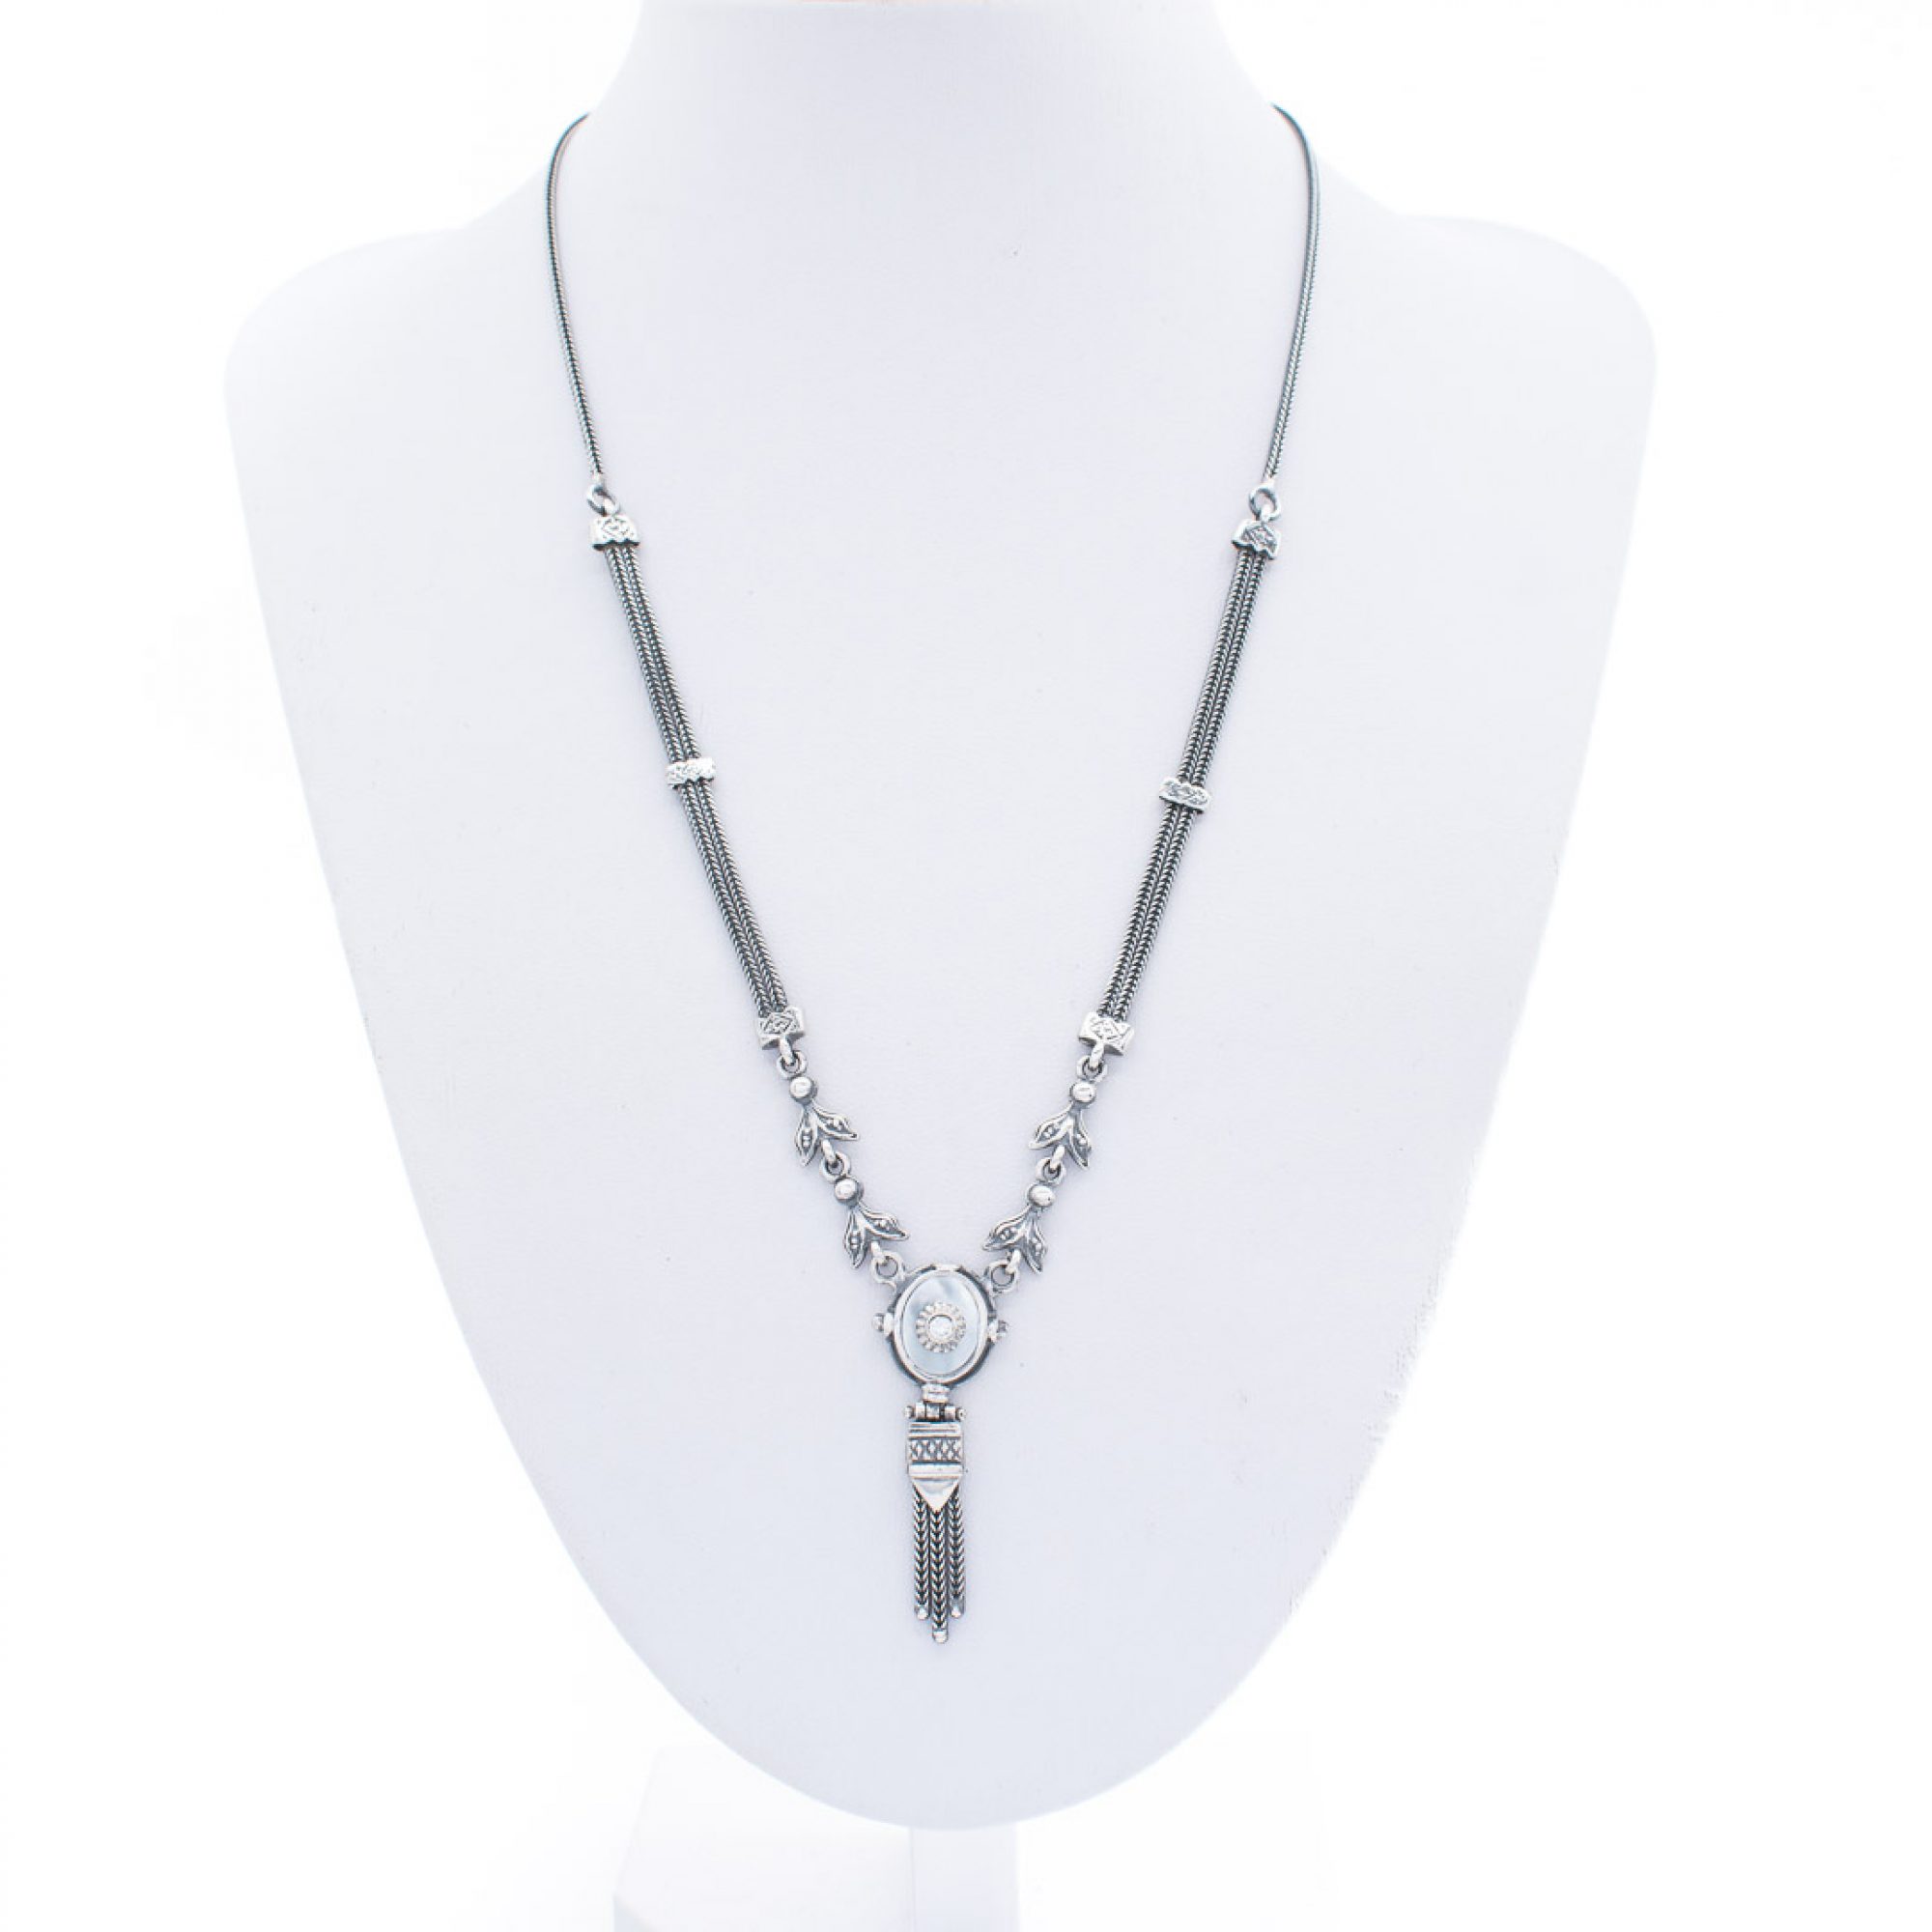 Oxidised necklace with mother of pearl and zircon stone